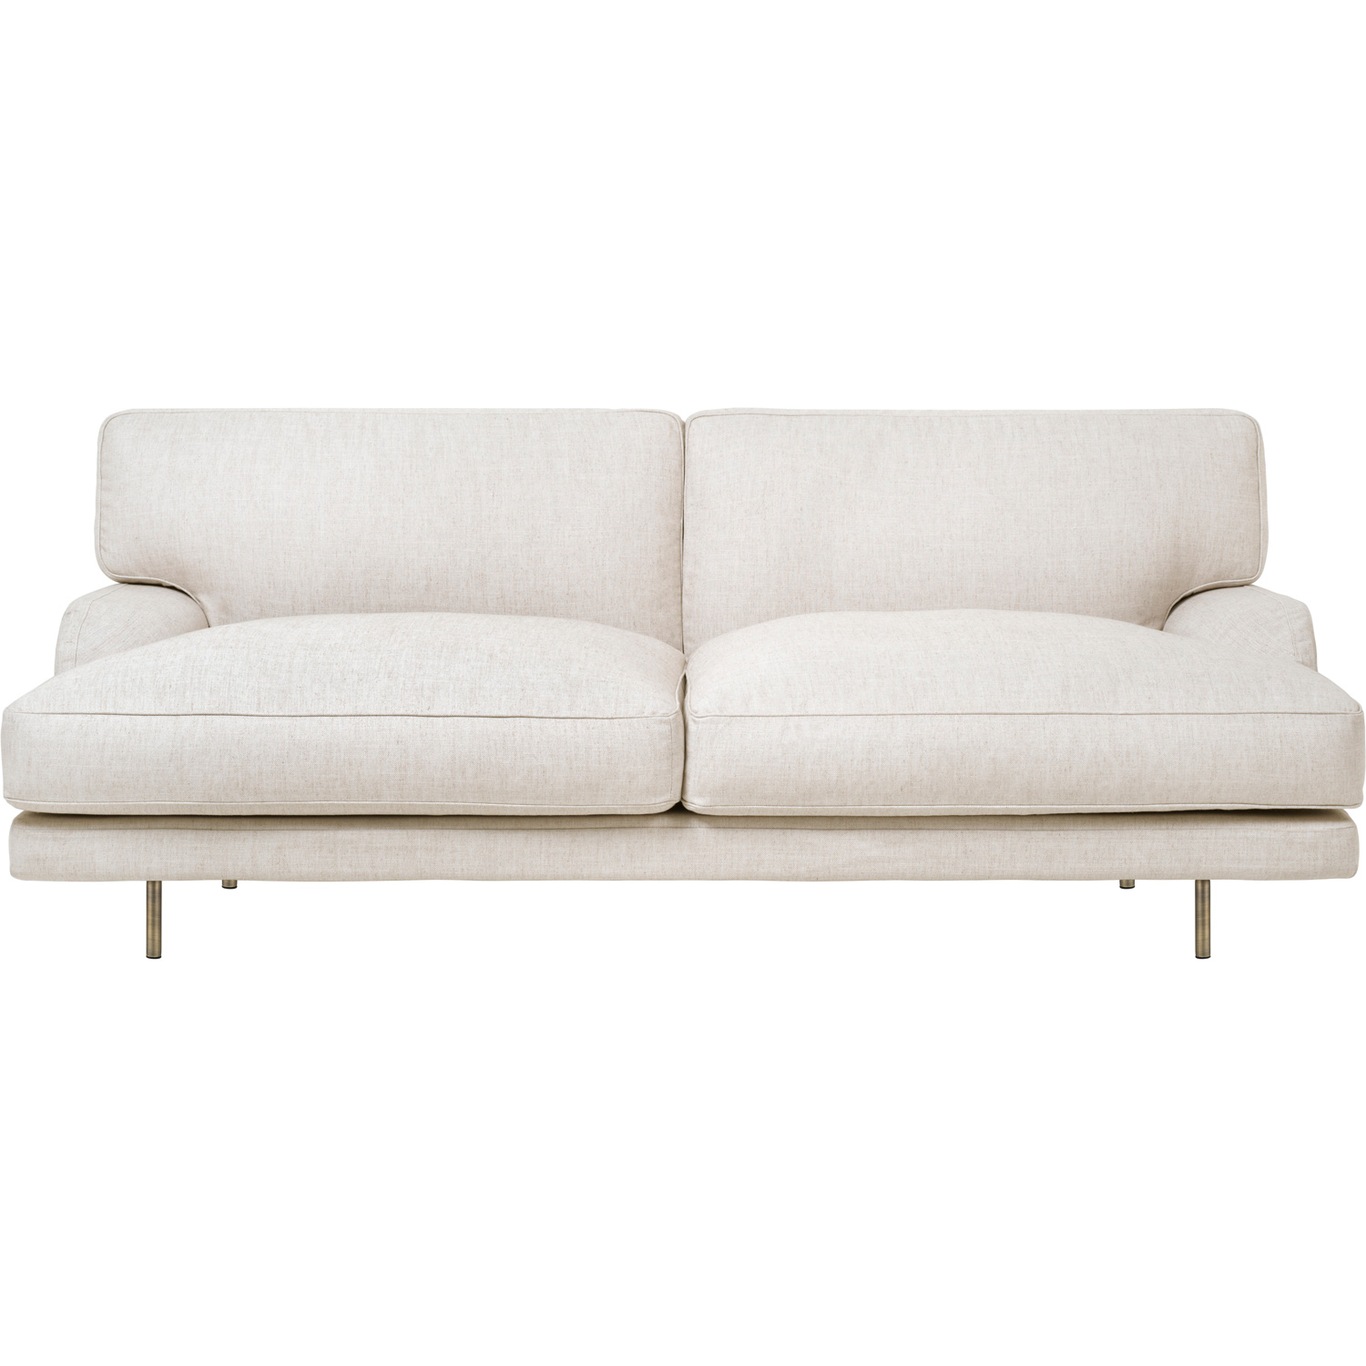 Flaneur Sofa FC 2,5-Pers, Ben Messing / Hot Madison 419 Off White